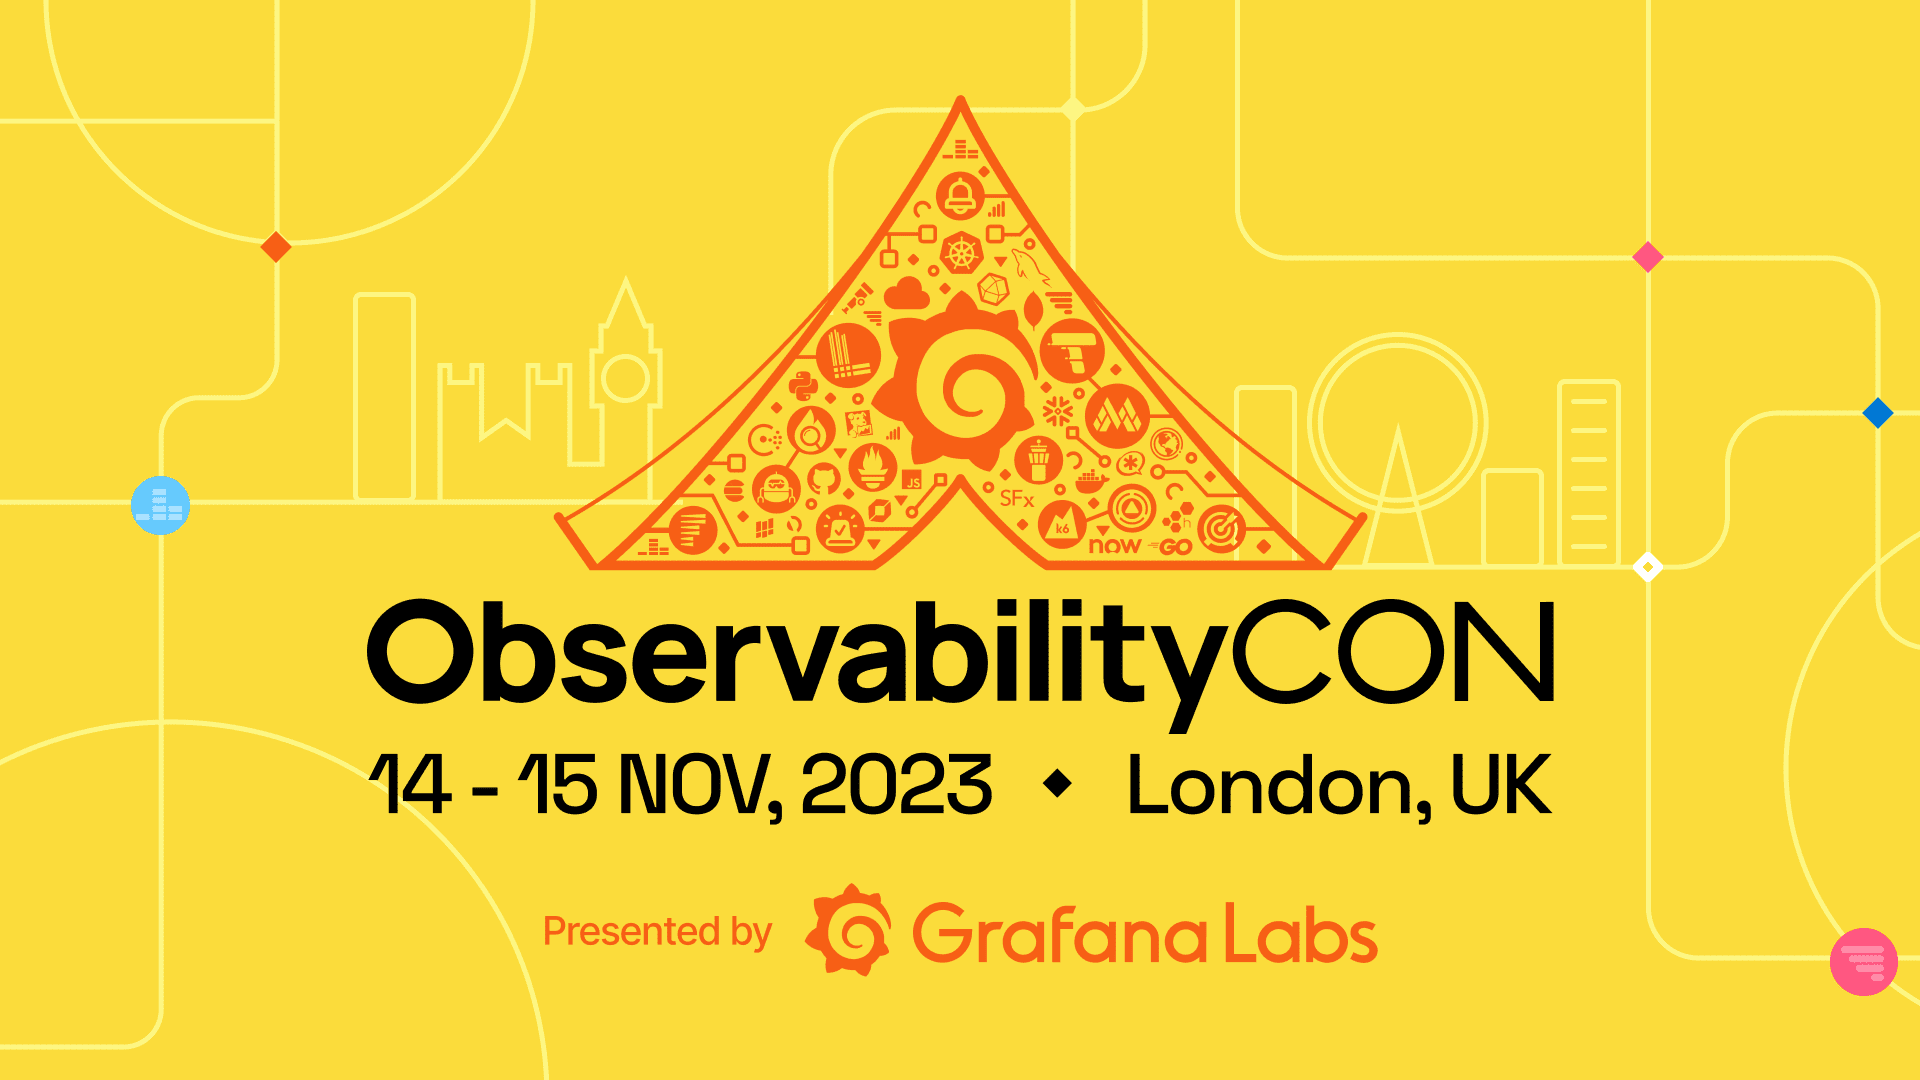 The title card for ObservabilityCON 2023.